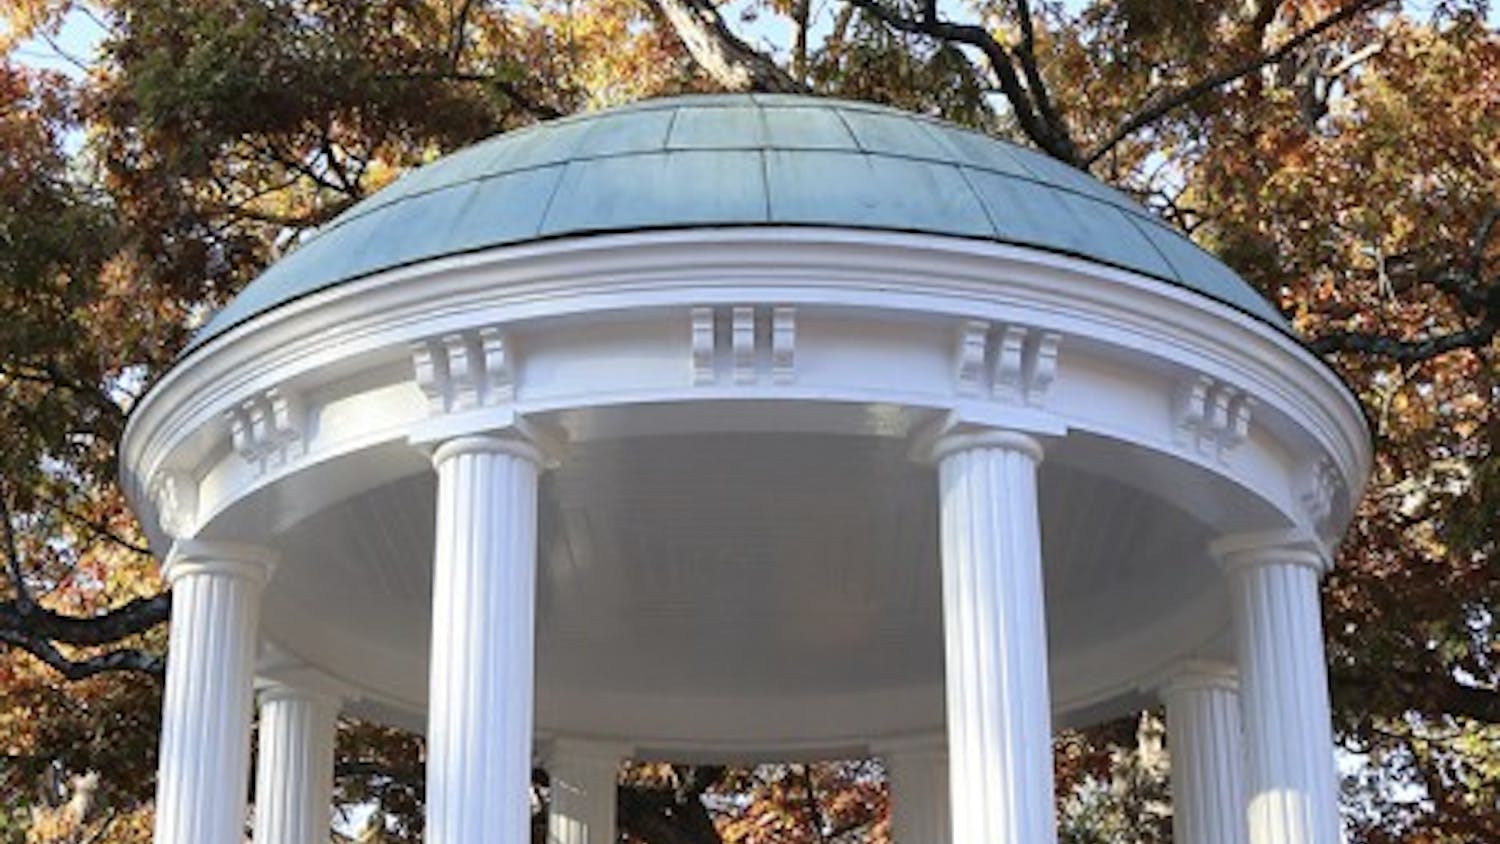 The Old Well at UNC-Chapel Hil.